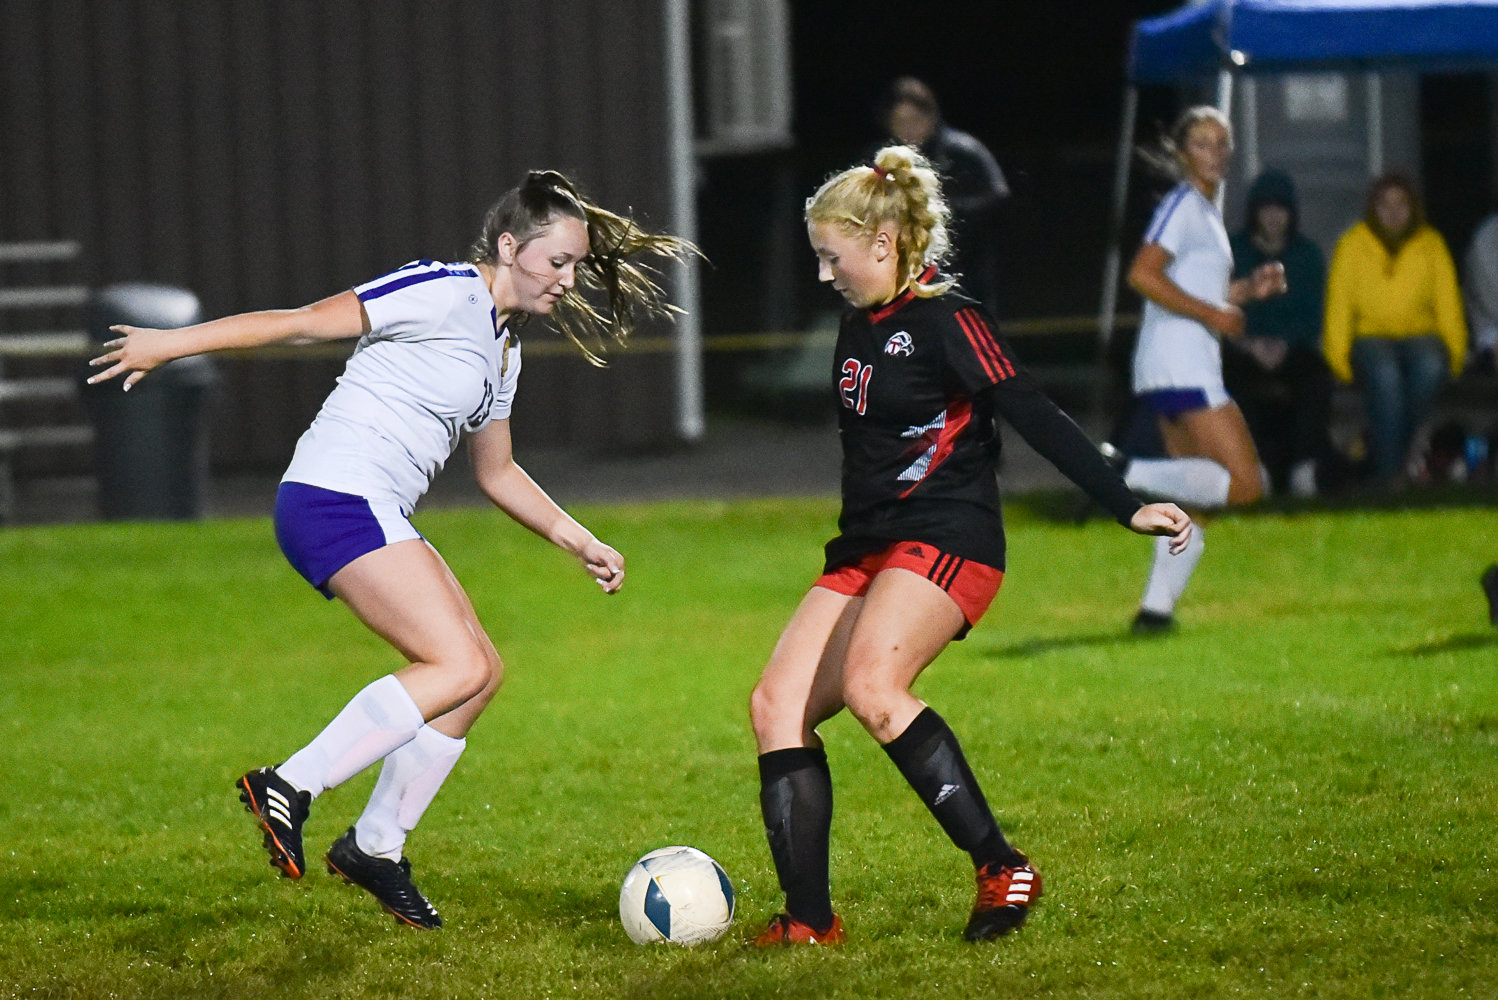 Onalaska's Randi Haight (left) and Toledo's Kailea Lairson (right) battle for possession during the first half of the Loggers' match against the Riverhawks on Oct. 24, in Toledo.